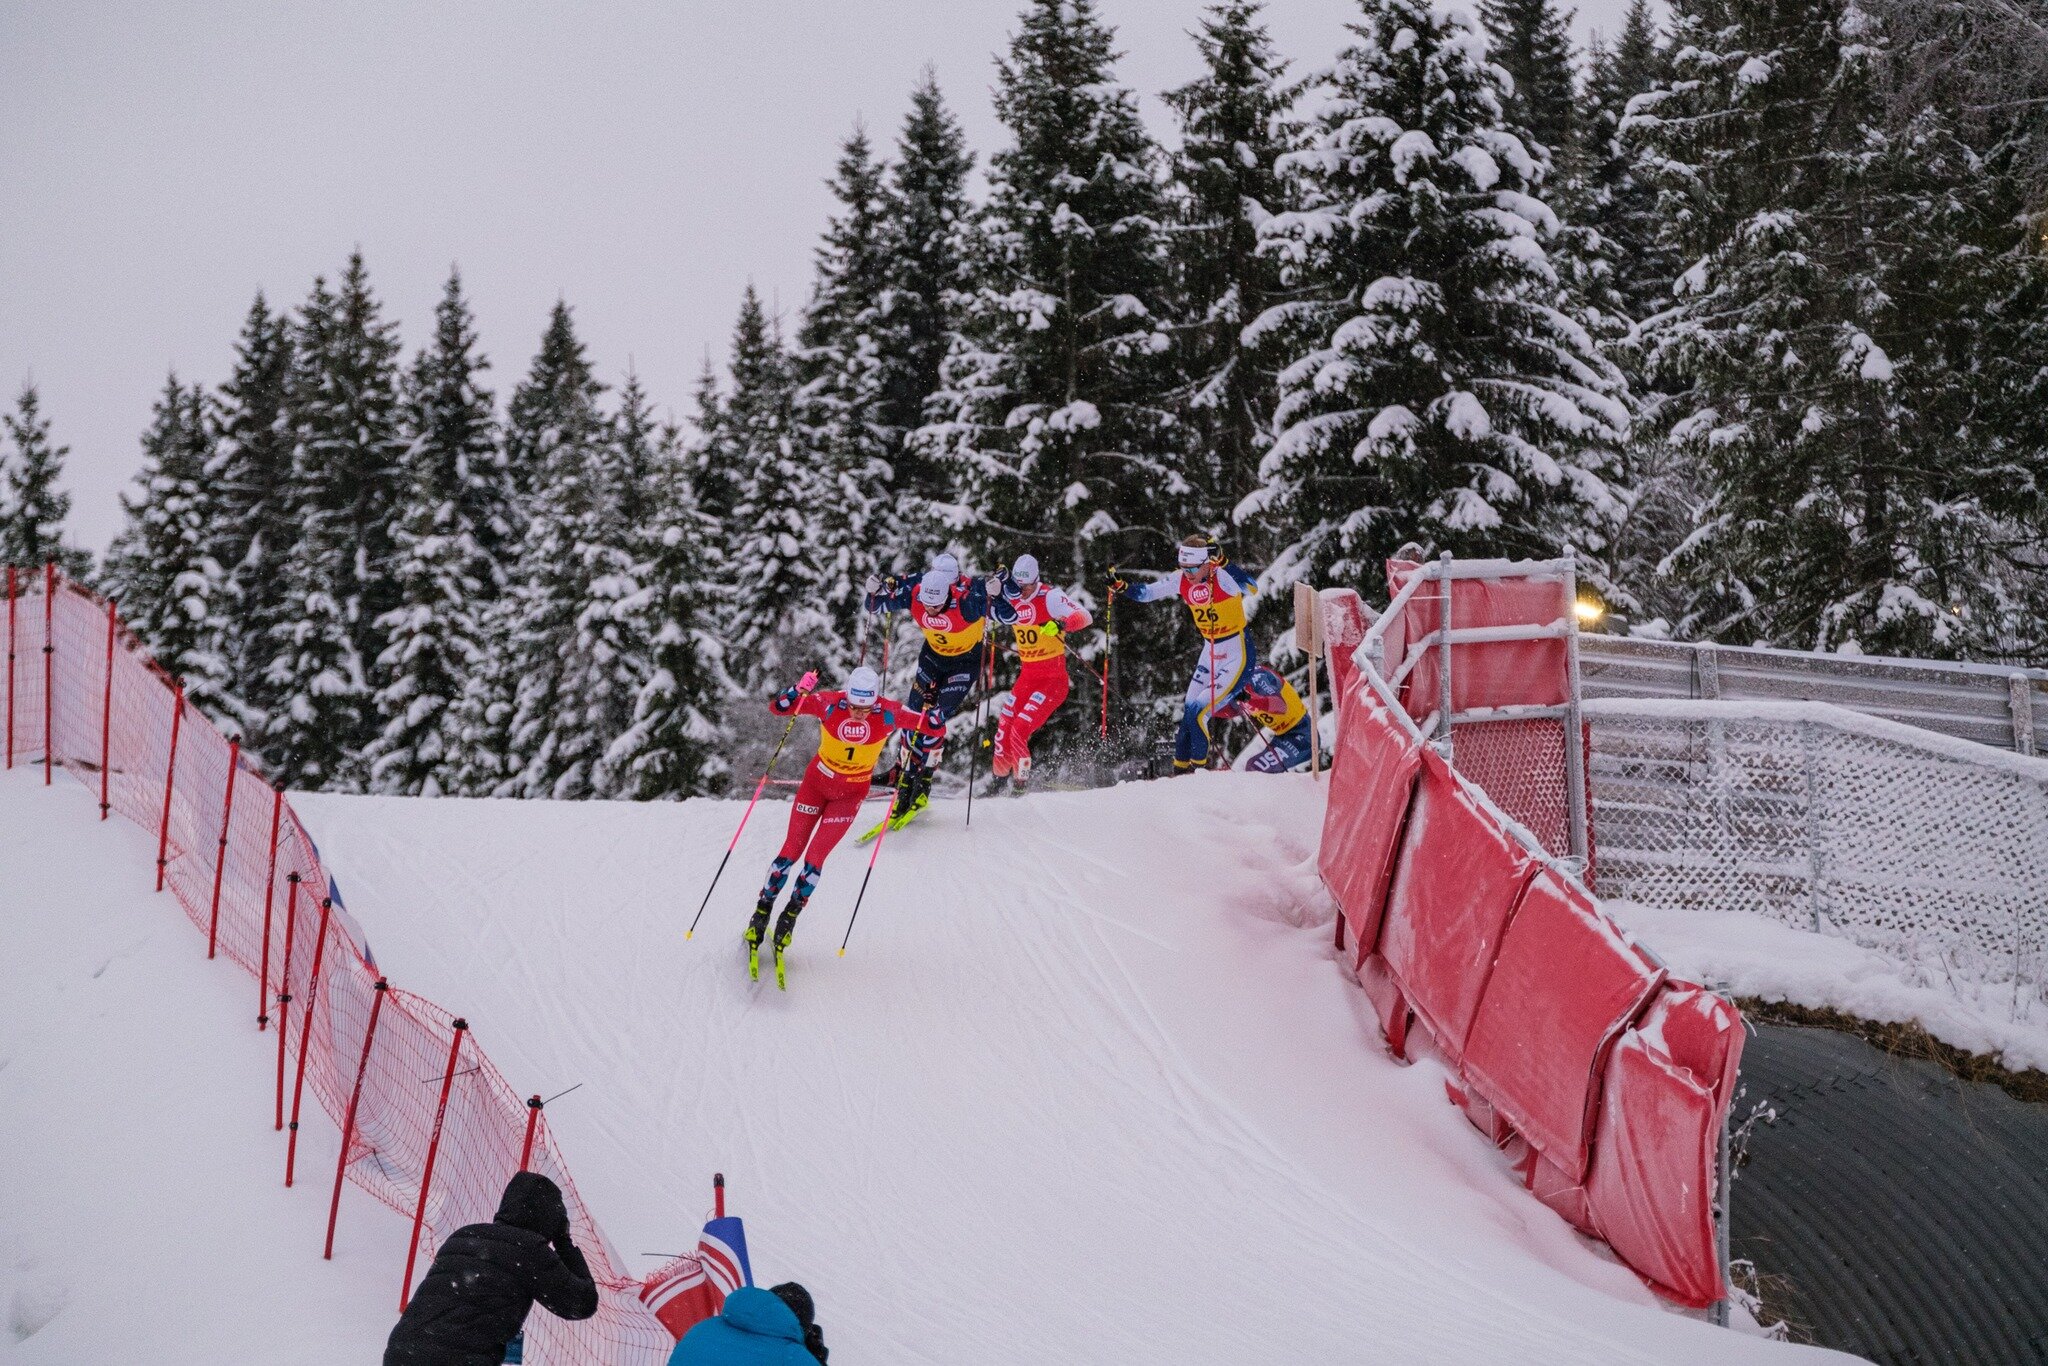 This week, there is only one year until Gran&aring;sen and the Ski World Championship @trondheim2025 kicks off! We can't wait! 🎉🤩 Here's a sneak peek of what's to come with some photos from the World Cup and the &quot;trial&quot; event in December.